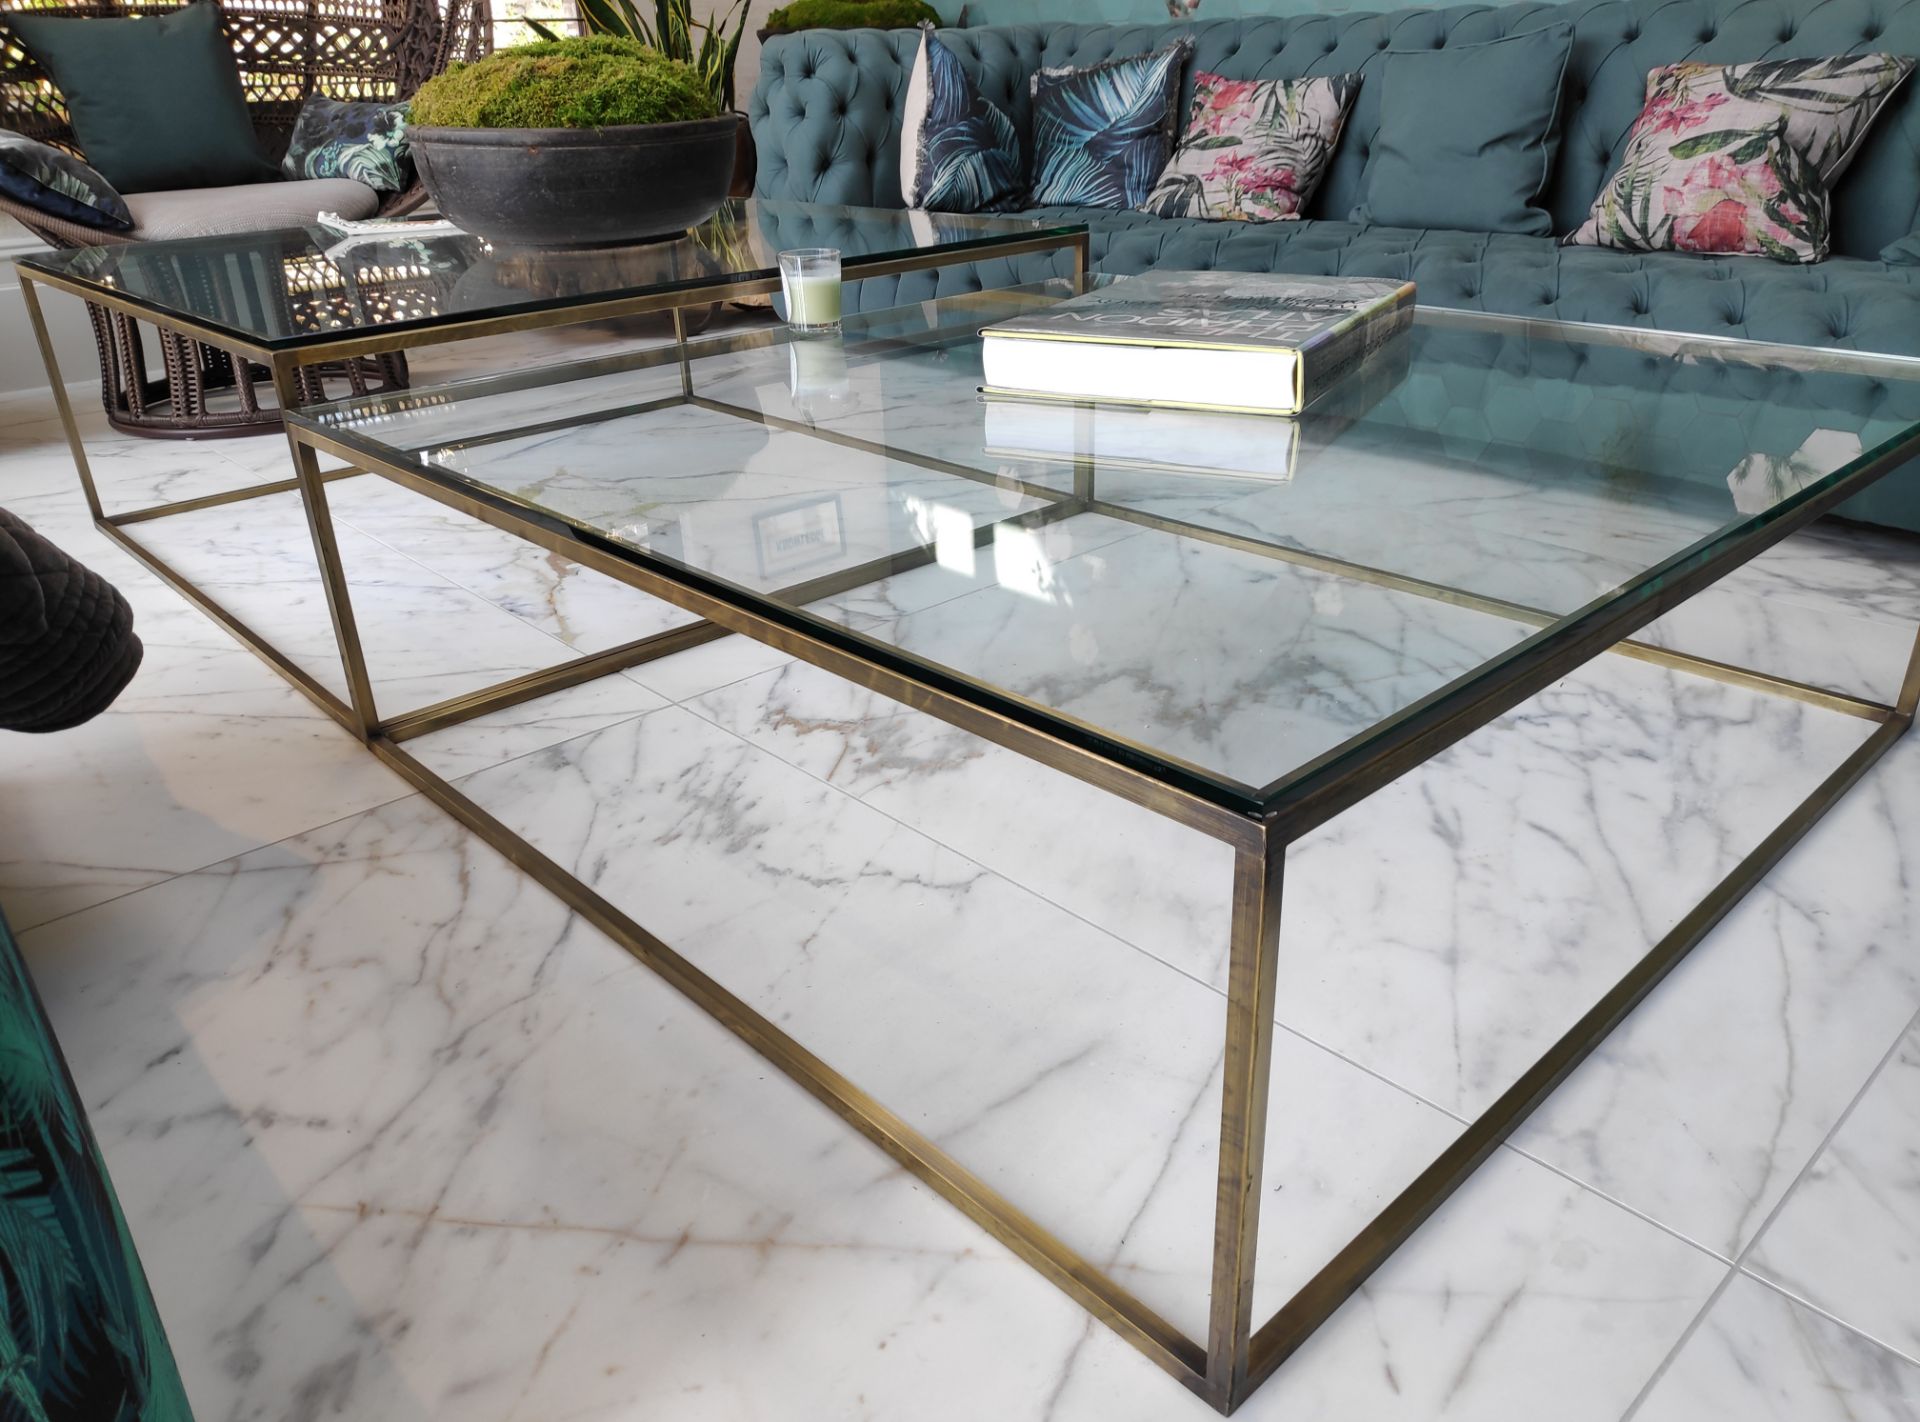 1 x Large 2-Tier Glass Coffee Table with Metal Frame - Dimensions: W240 x D120 x H45.5 cm - - Image 12 of 14